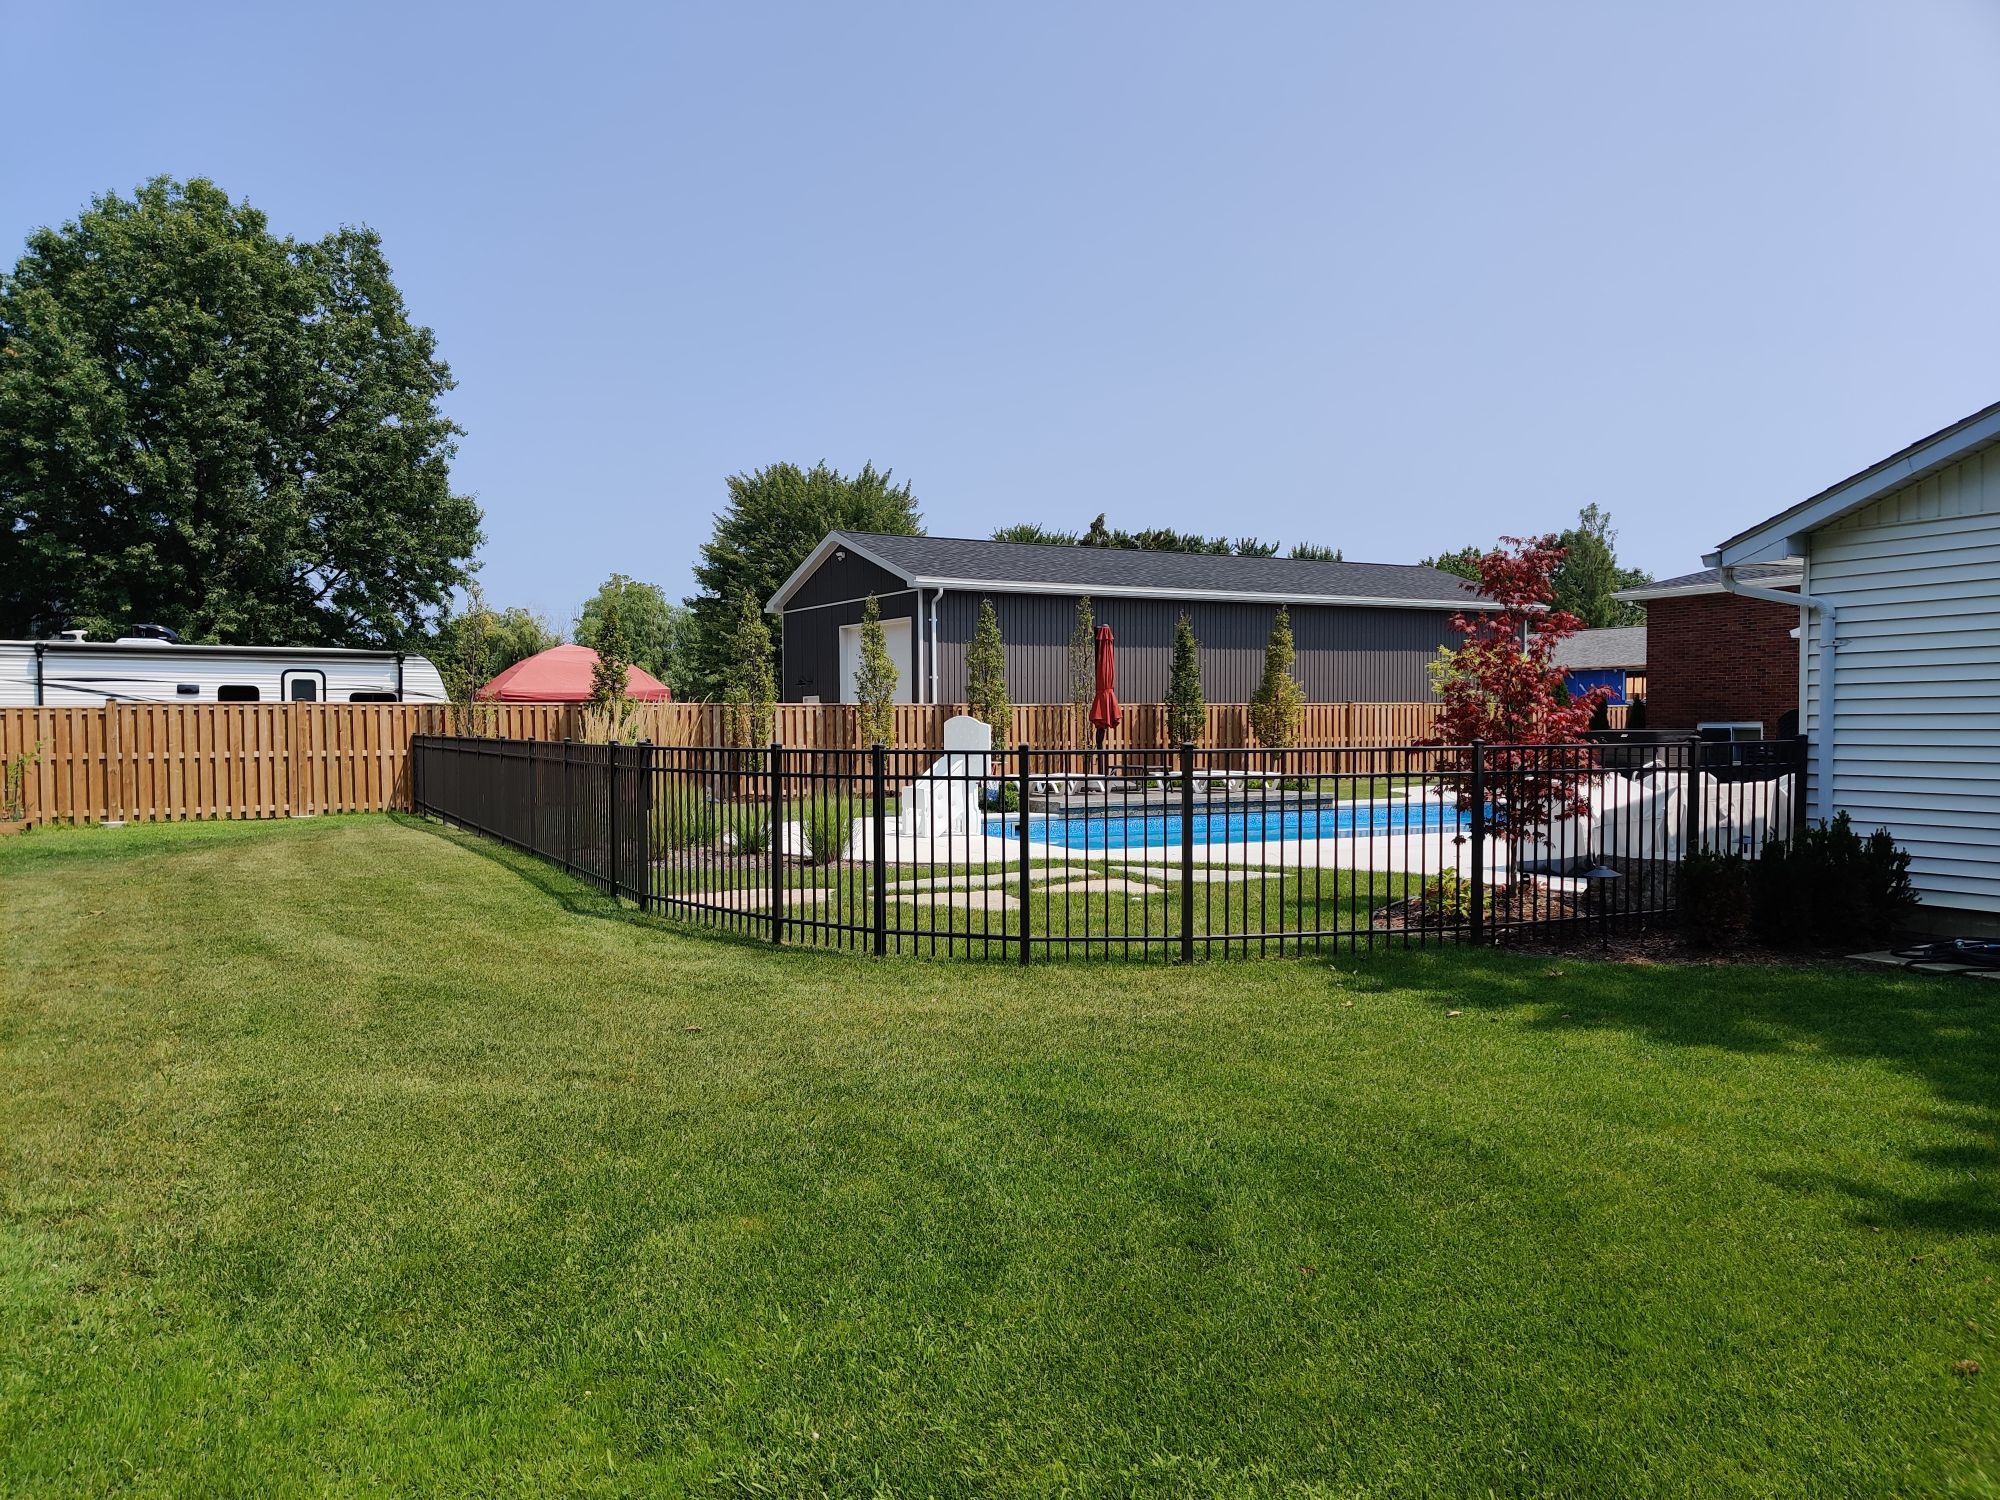 Curved fence in Puce at this beautifully landscaped yard with a pool. EFF-20 Matte Bronze Residential Fence